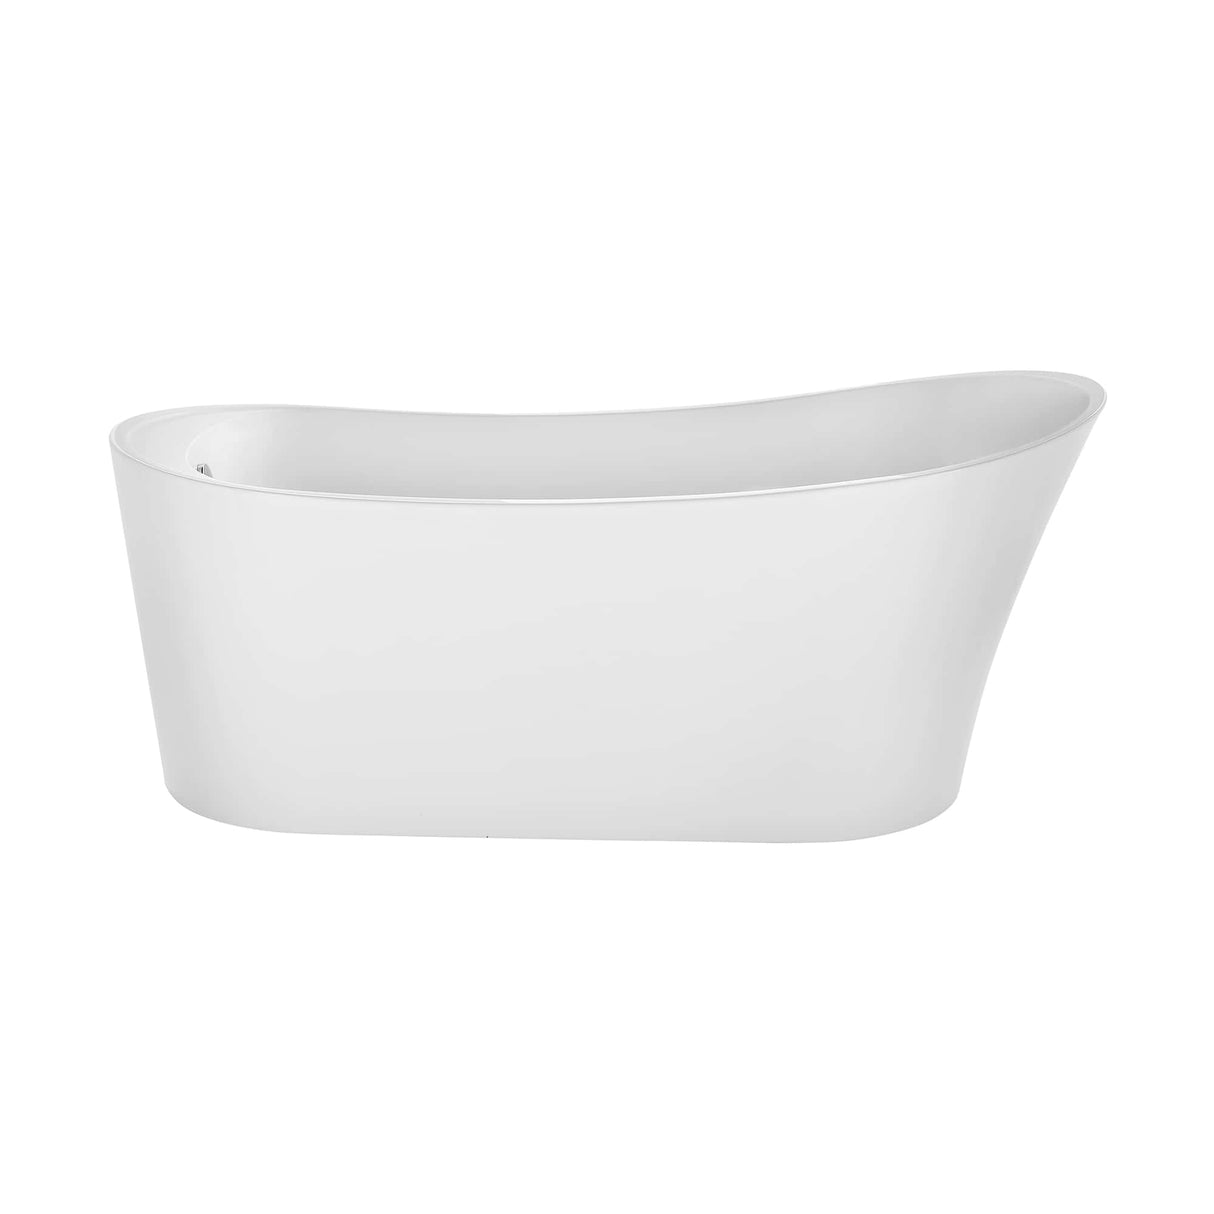 Empava-67FT1528 luxury freestanding acrylic soaking oval modern white SPA single-ended bathtub front view